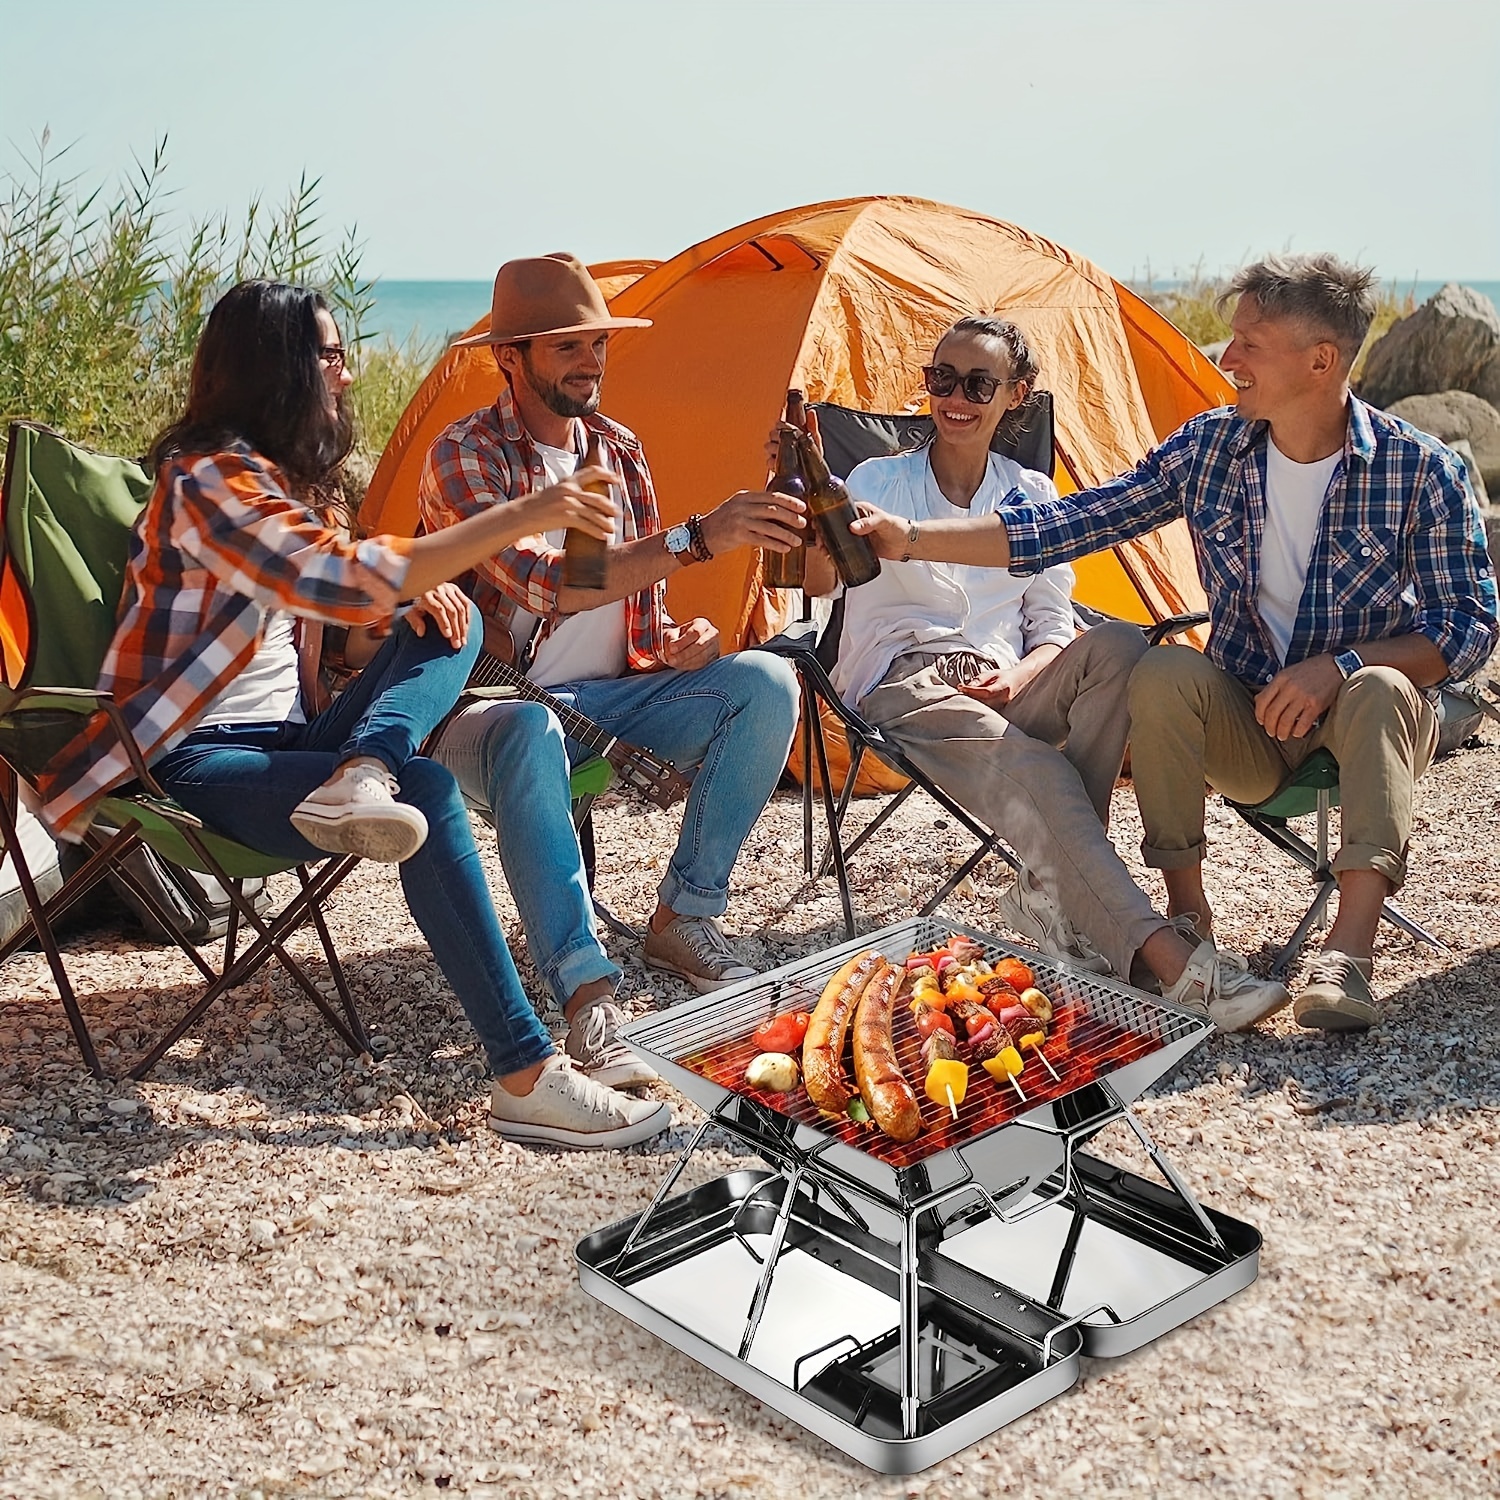 Folding Campfire Grill Portable Outdoor Camping BBQ Grill 304